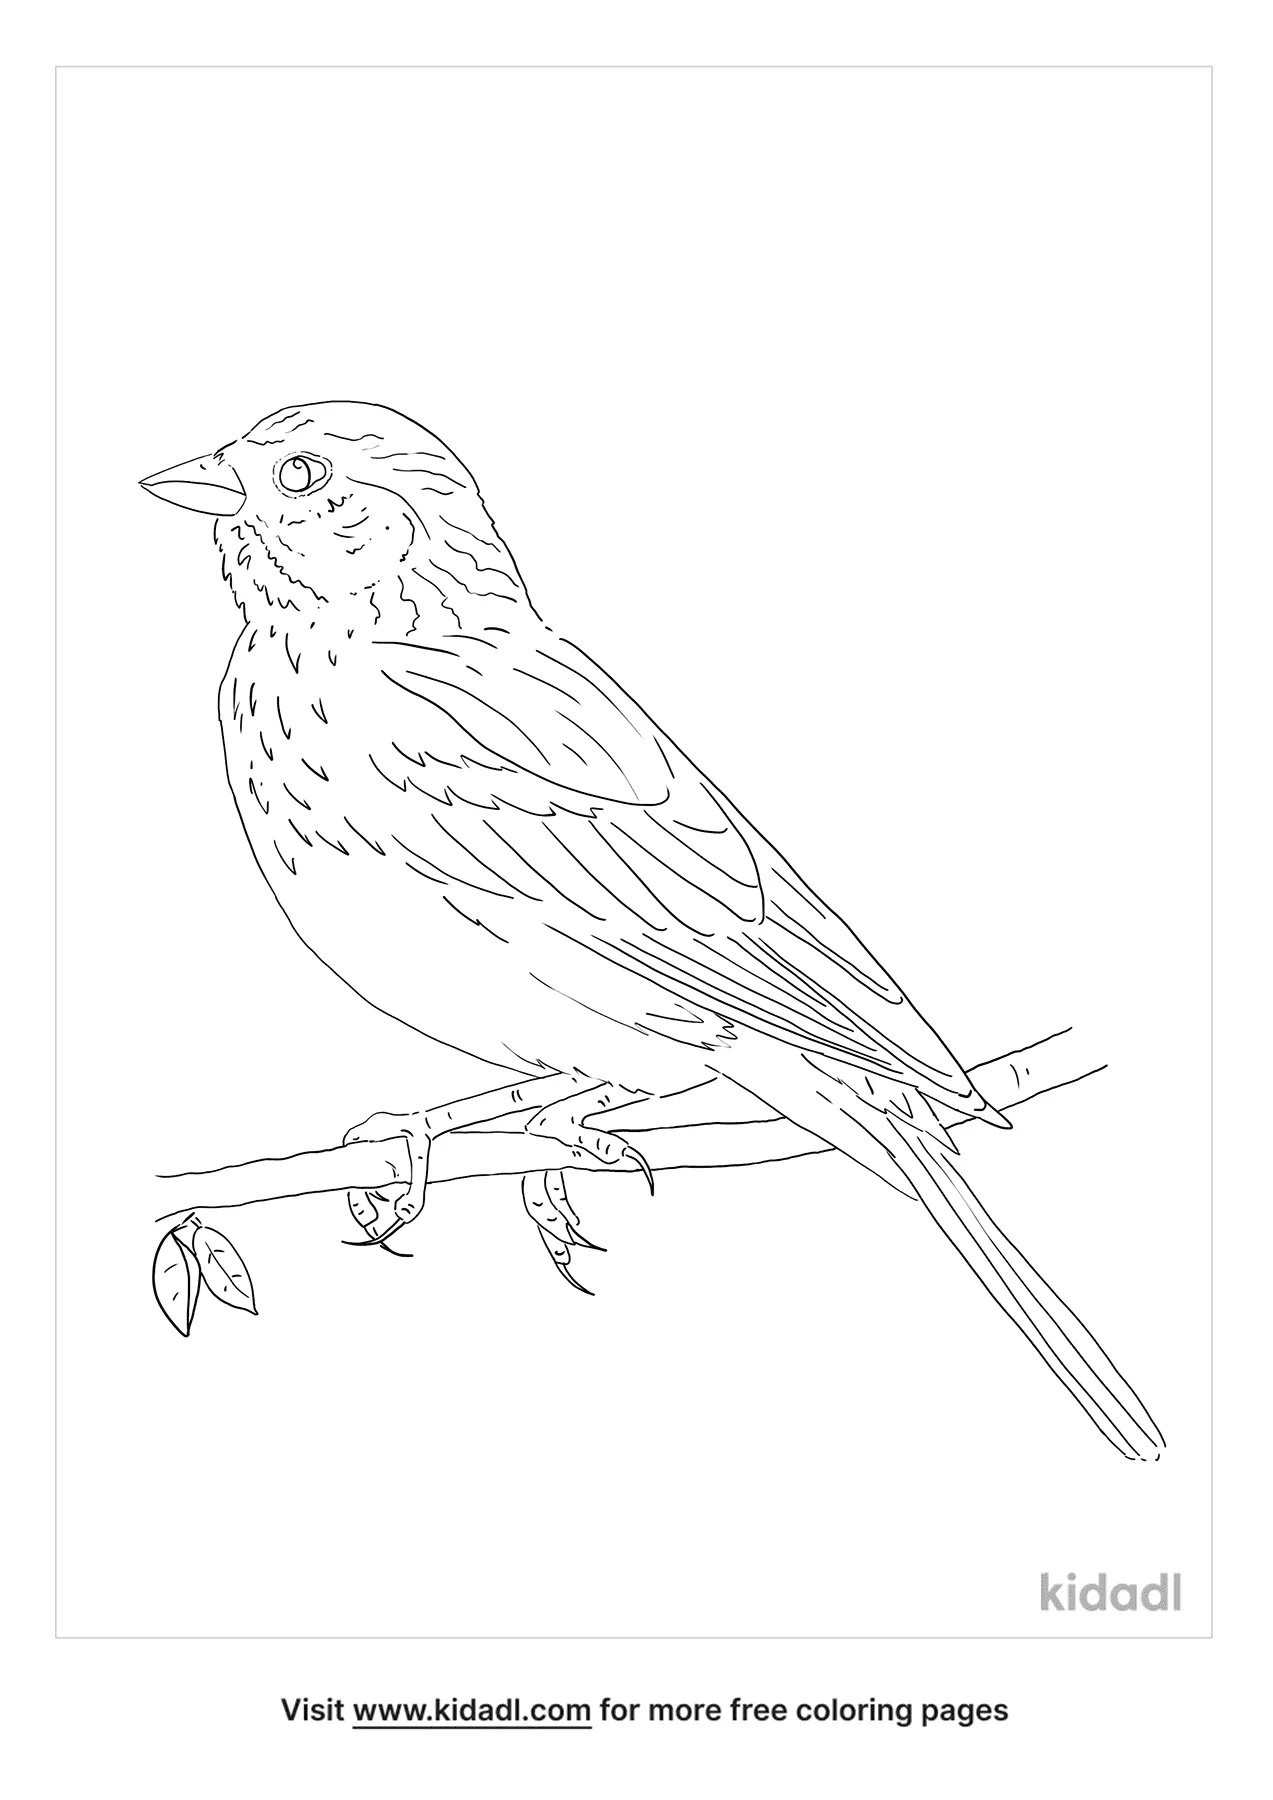 Free House Sparrow Coloring Page | Coloring Page Printables | Kidadl